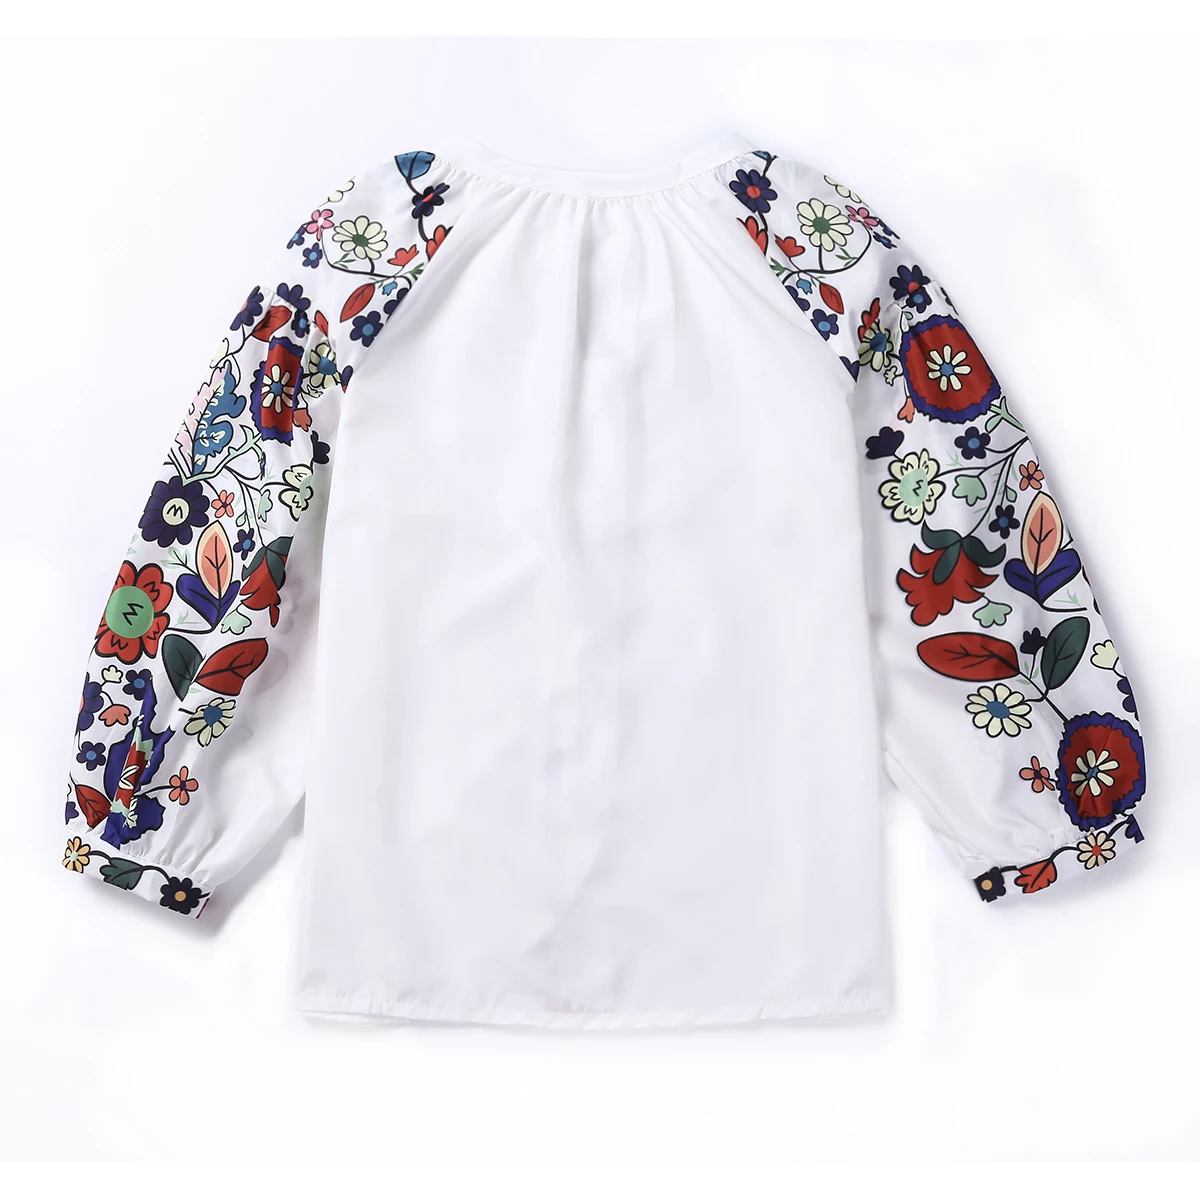 Women Autumn Clothes Long Sleeve Shirt Flower V-Neck Casual Loose Top Ladies Blouse Tee